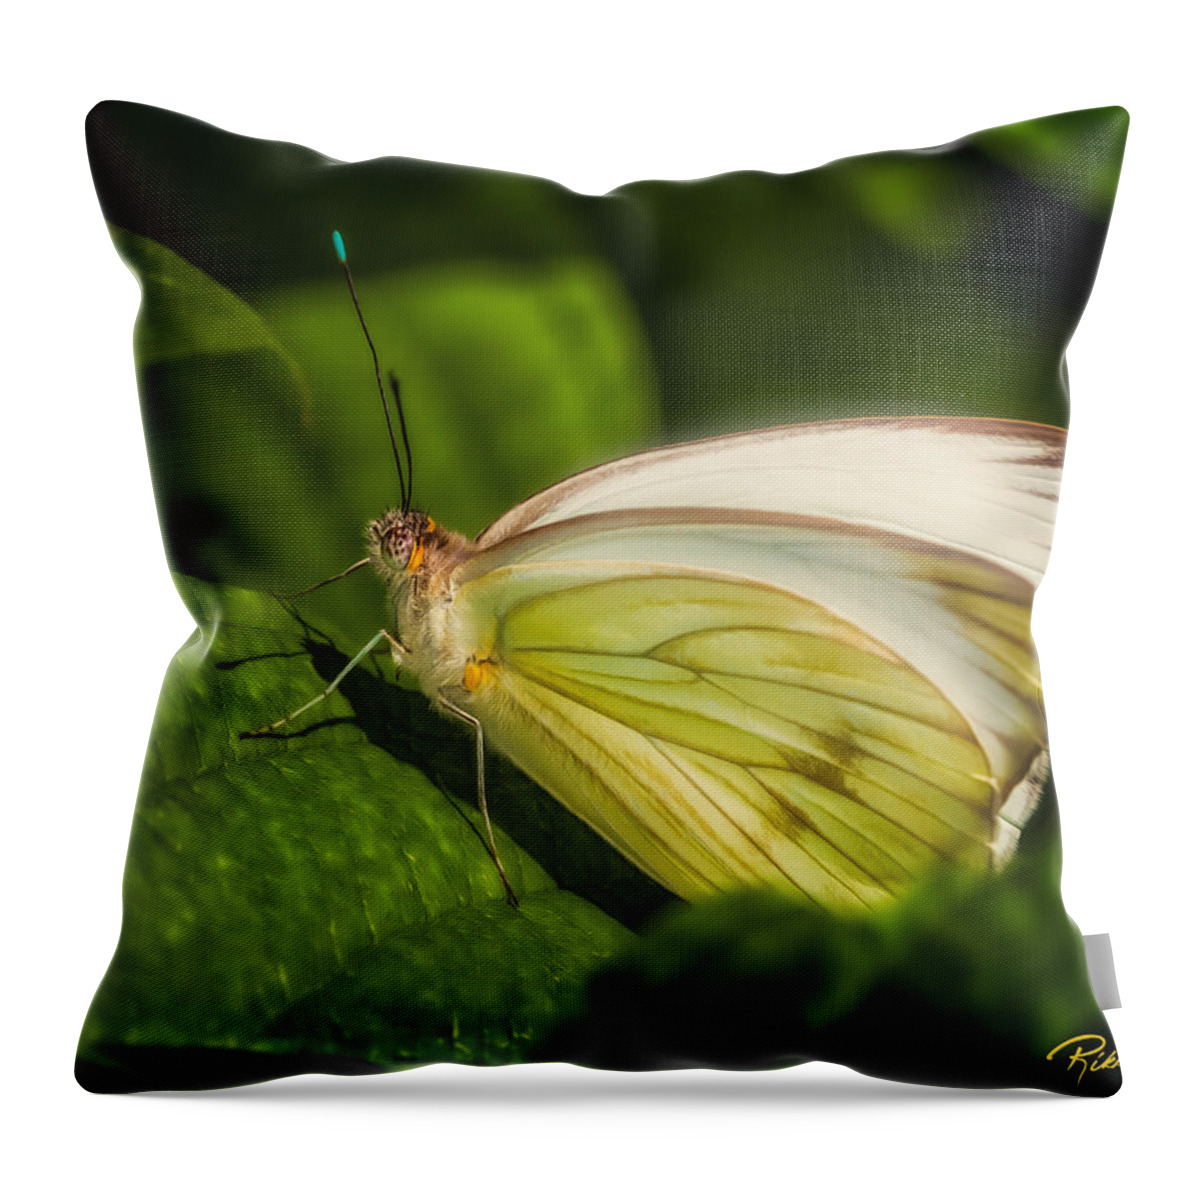 Animals Throw Pillow featuring the photograph White Butterfly Sunning by Rikk Flohr